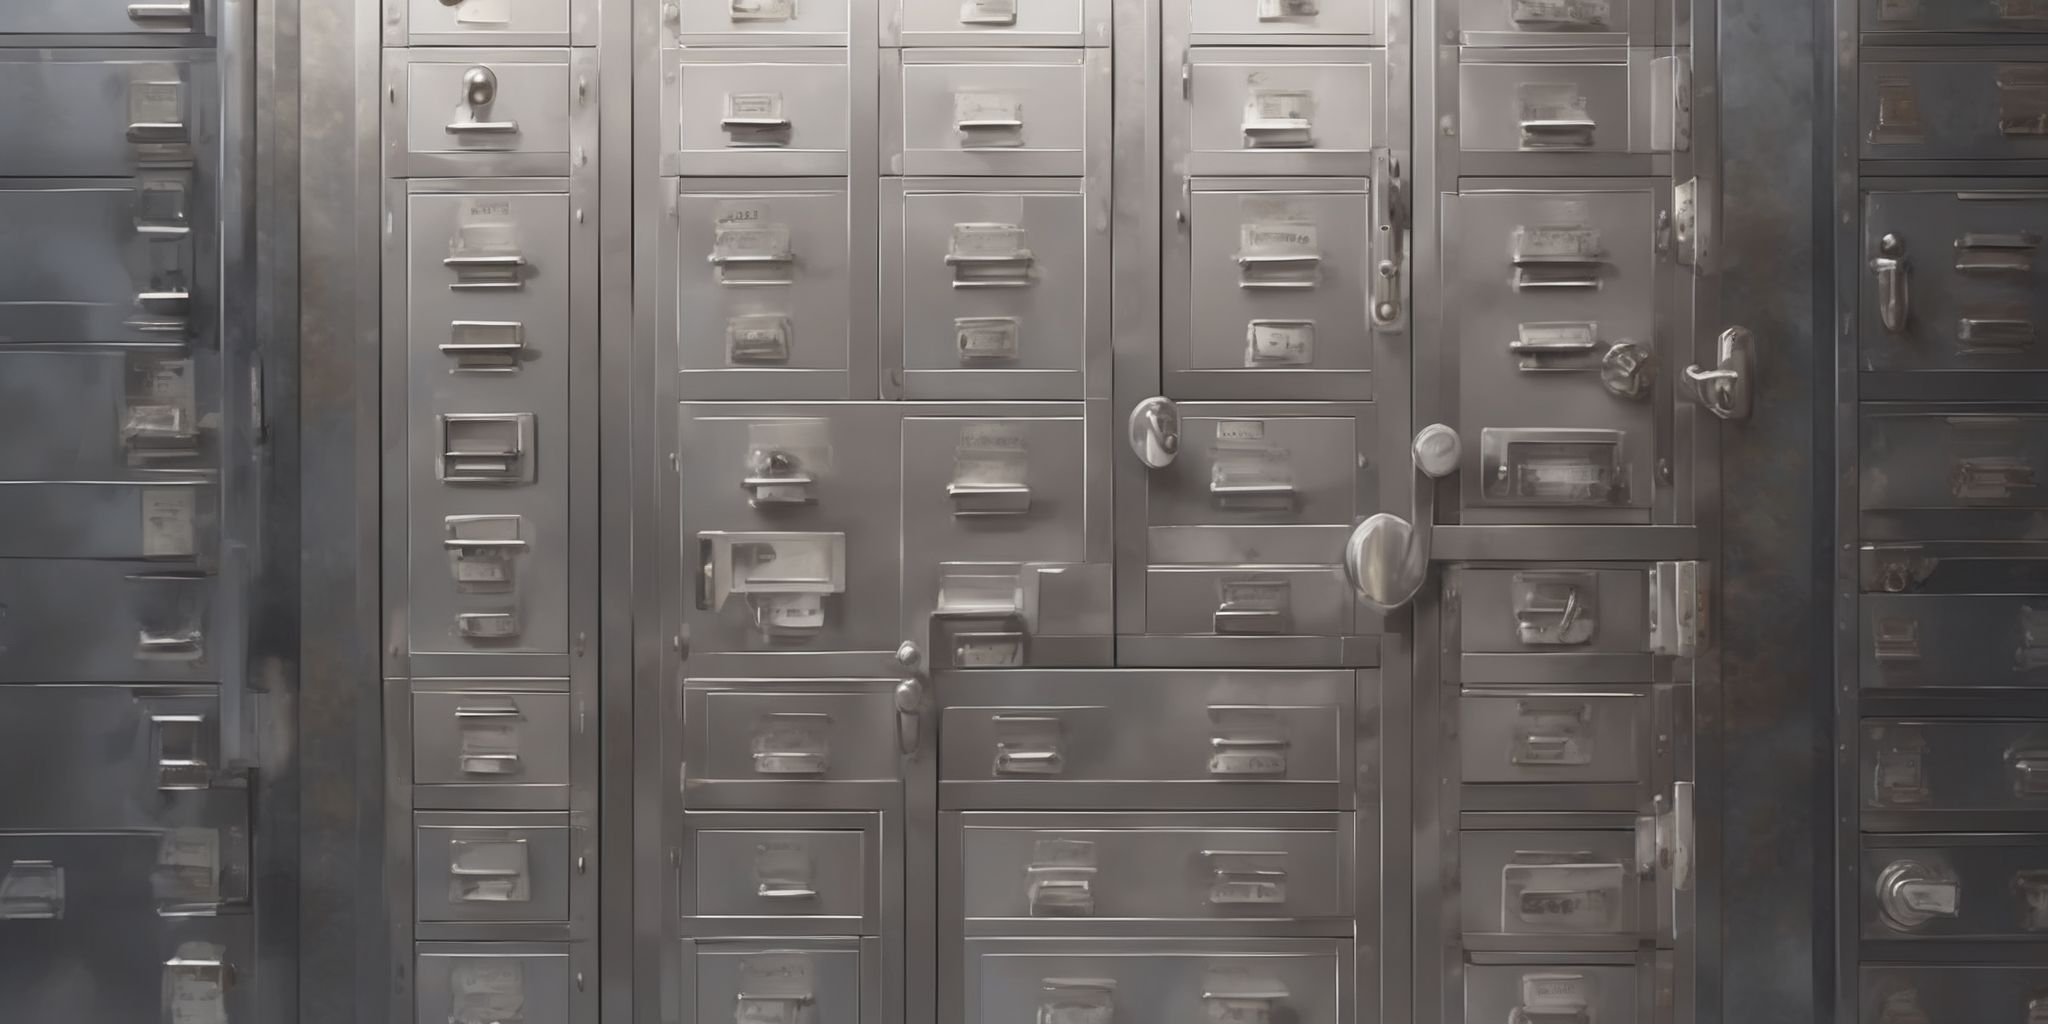 Safe deposit box  in realistic, photographic style